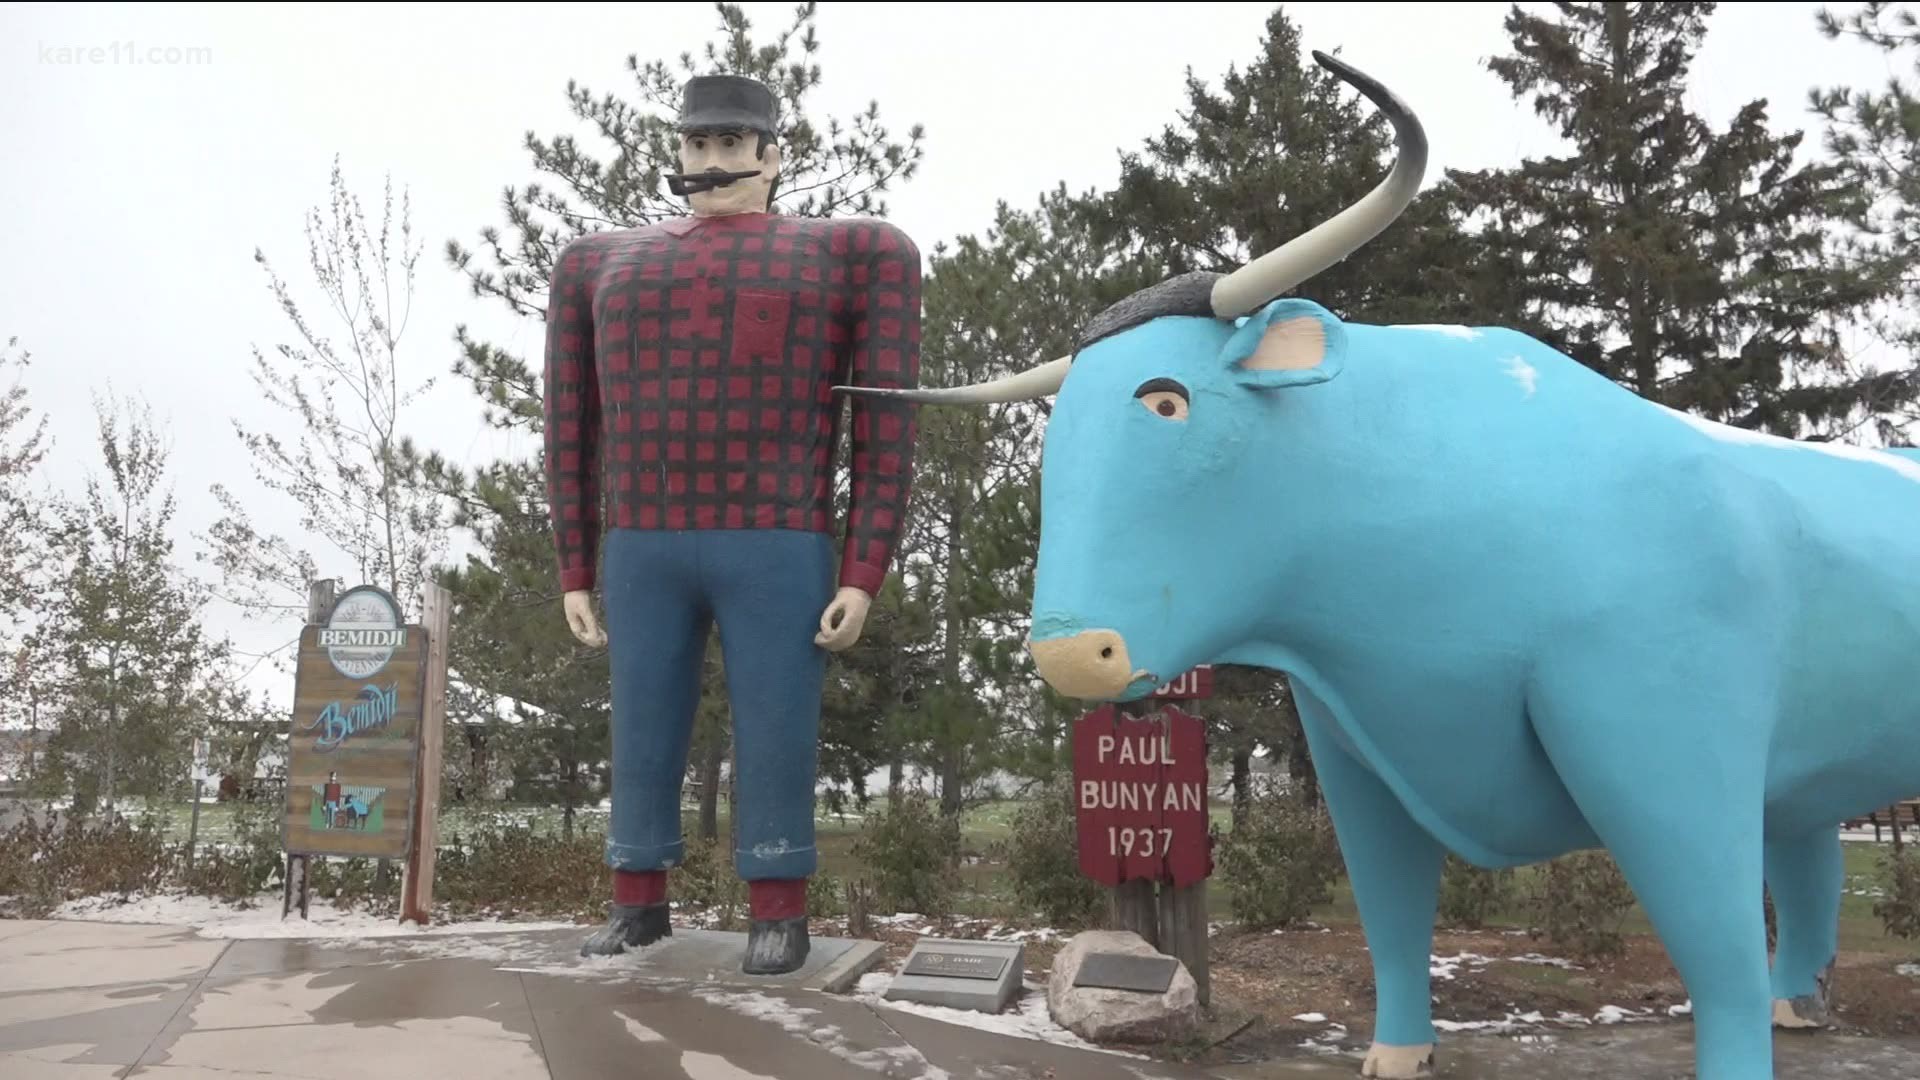 From Paul Bunyan, to holiday lights, to a 100 year old woolen mill - Sunrise heads north to Bemidji.